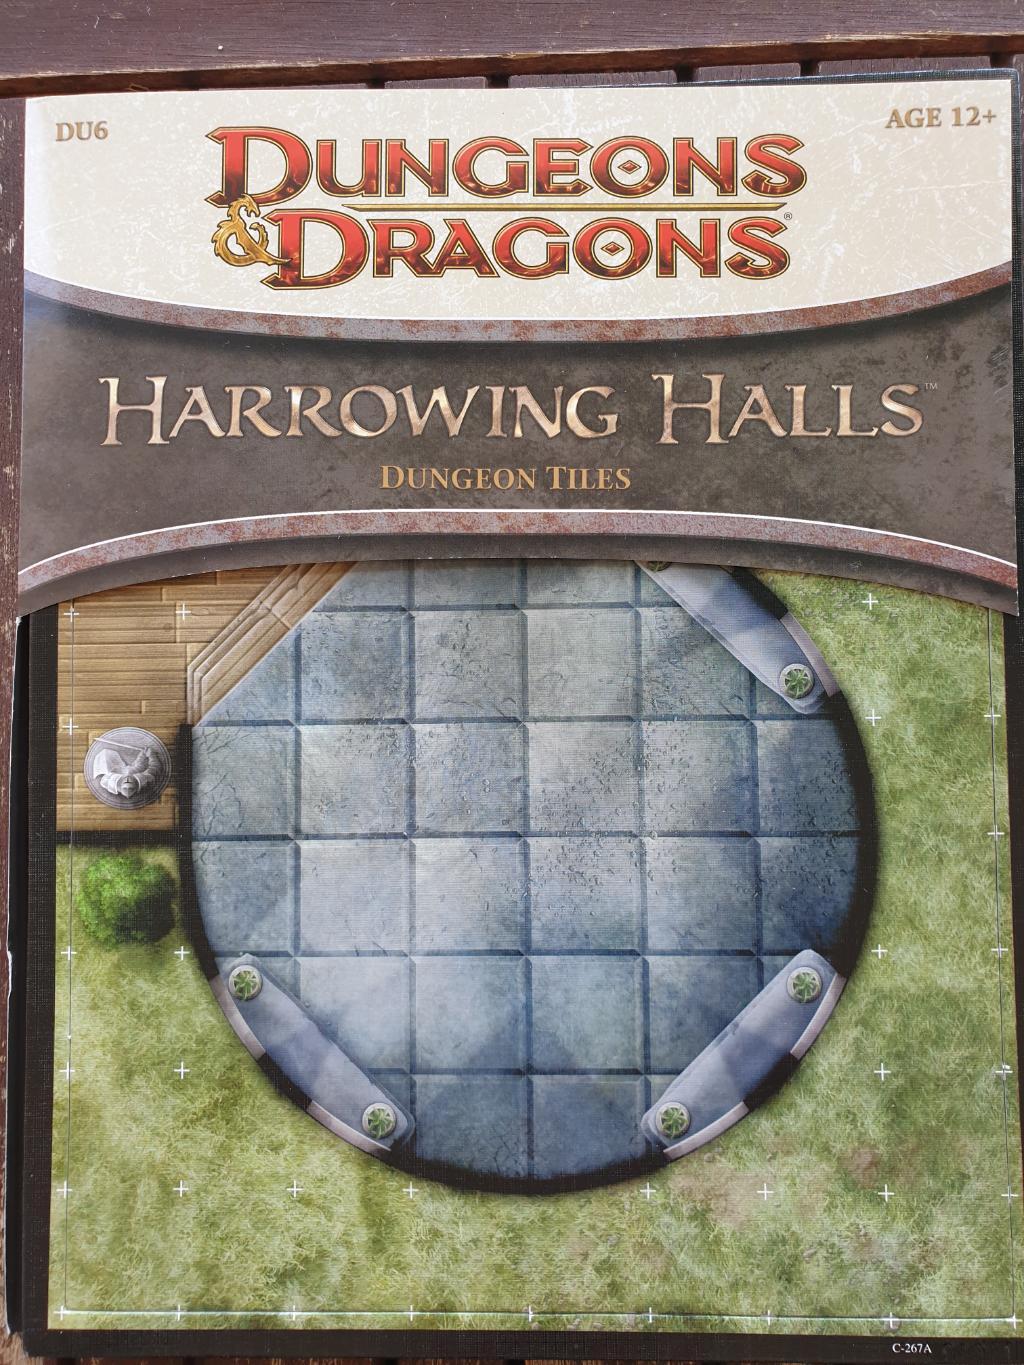 Dungeons & Dragons - 4th Edition - Du6 Harrowing Halls Dungeon Tiles